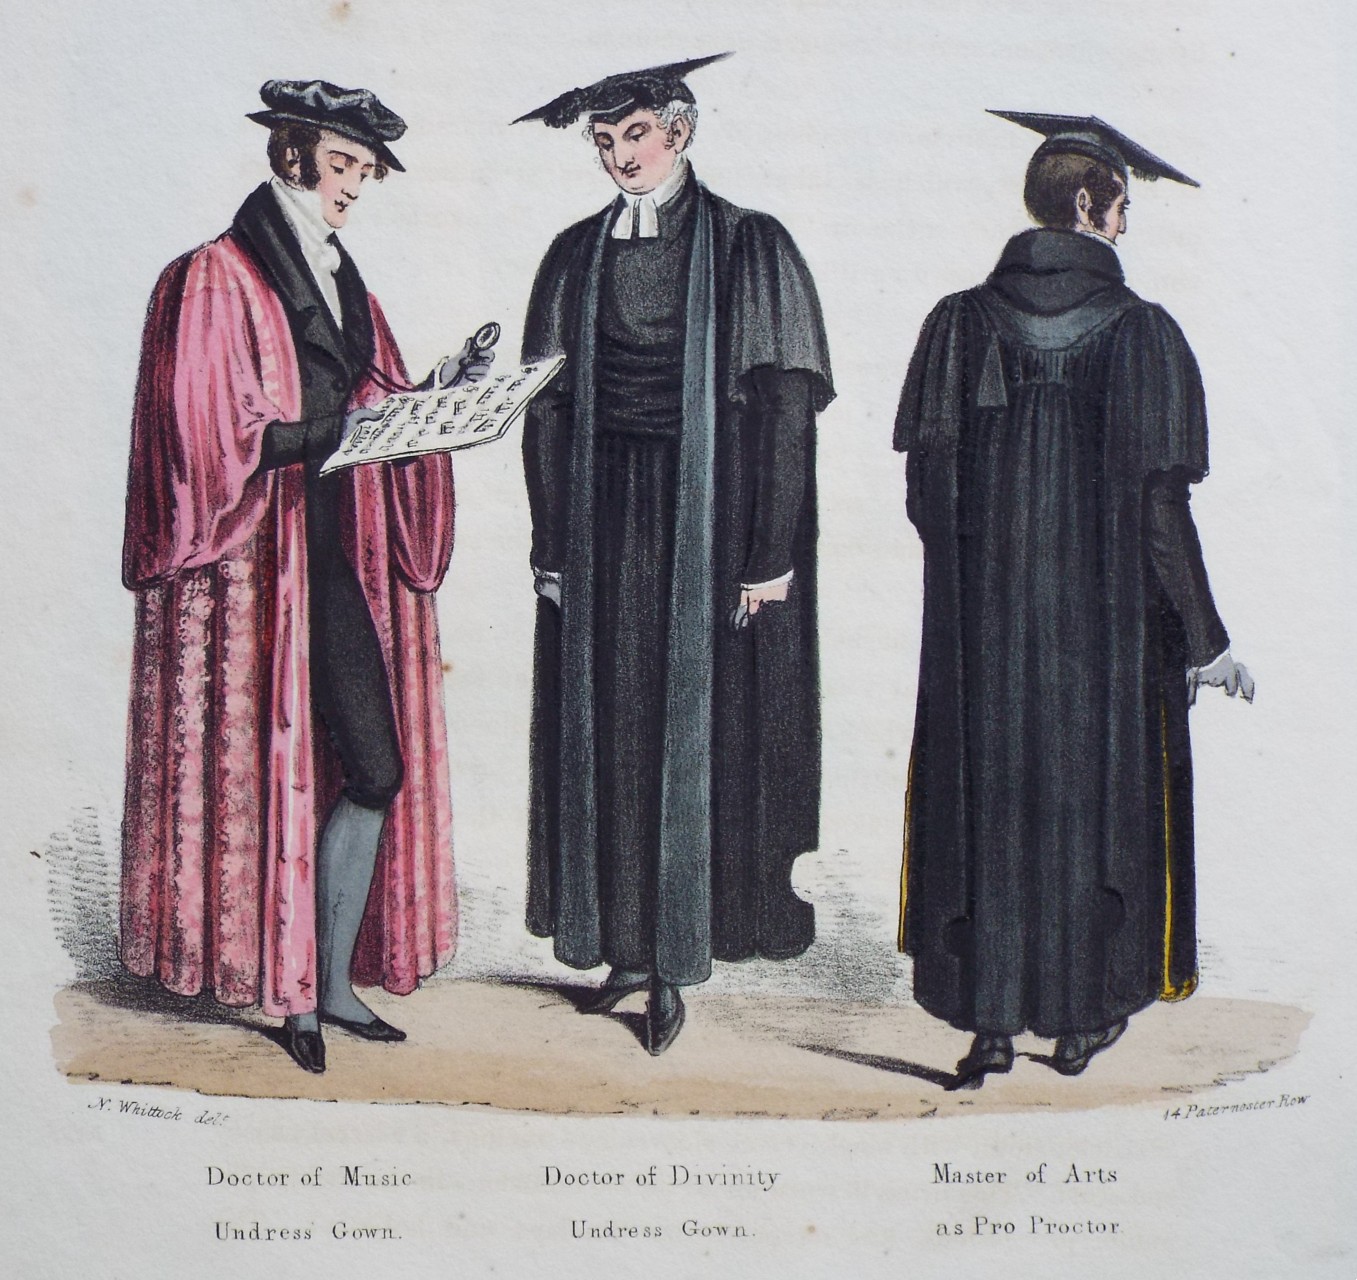 Lithograph - Doctor of Music Undress Gown. Doctor of Divinity Undress Gown. Master of Arts as Pro Proctor.